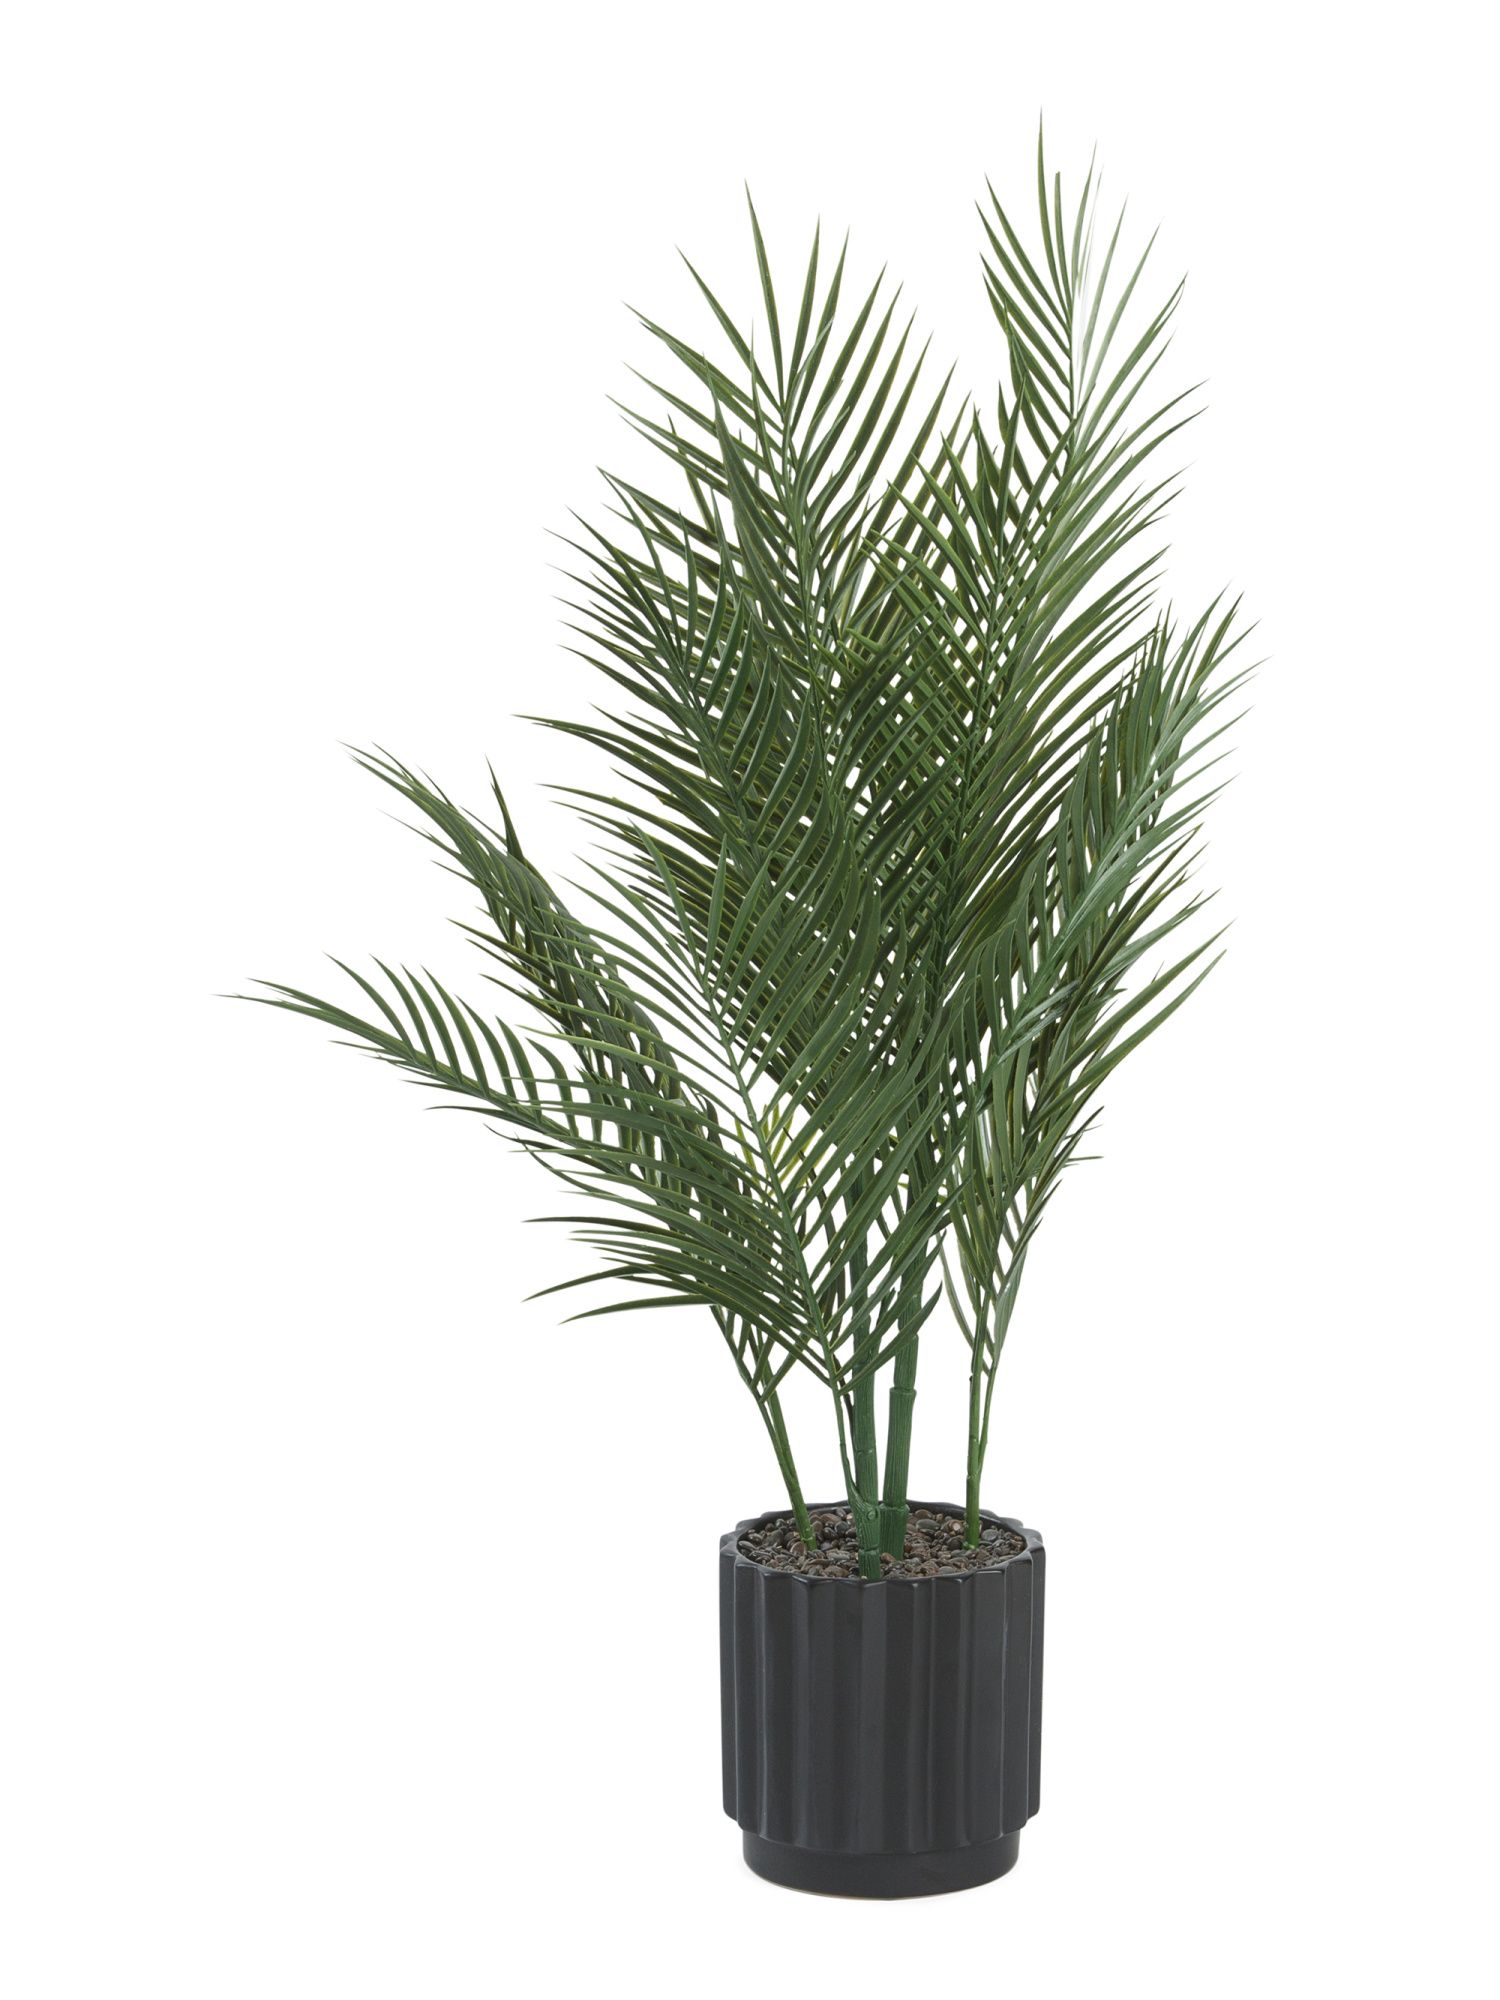 Extra Large Areca Palm In Wedge Pot | TJ Maxx